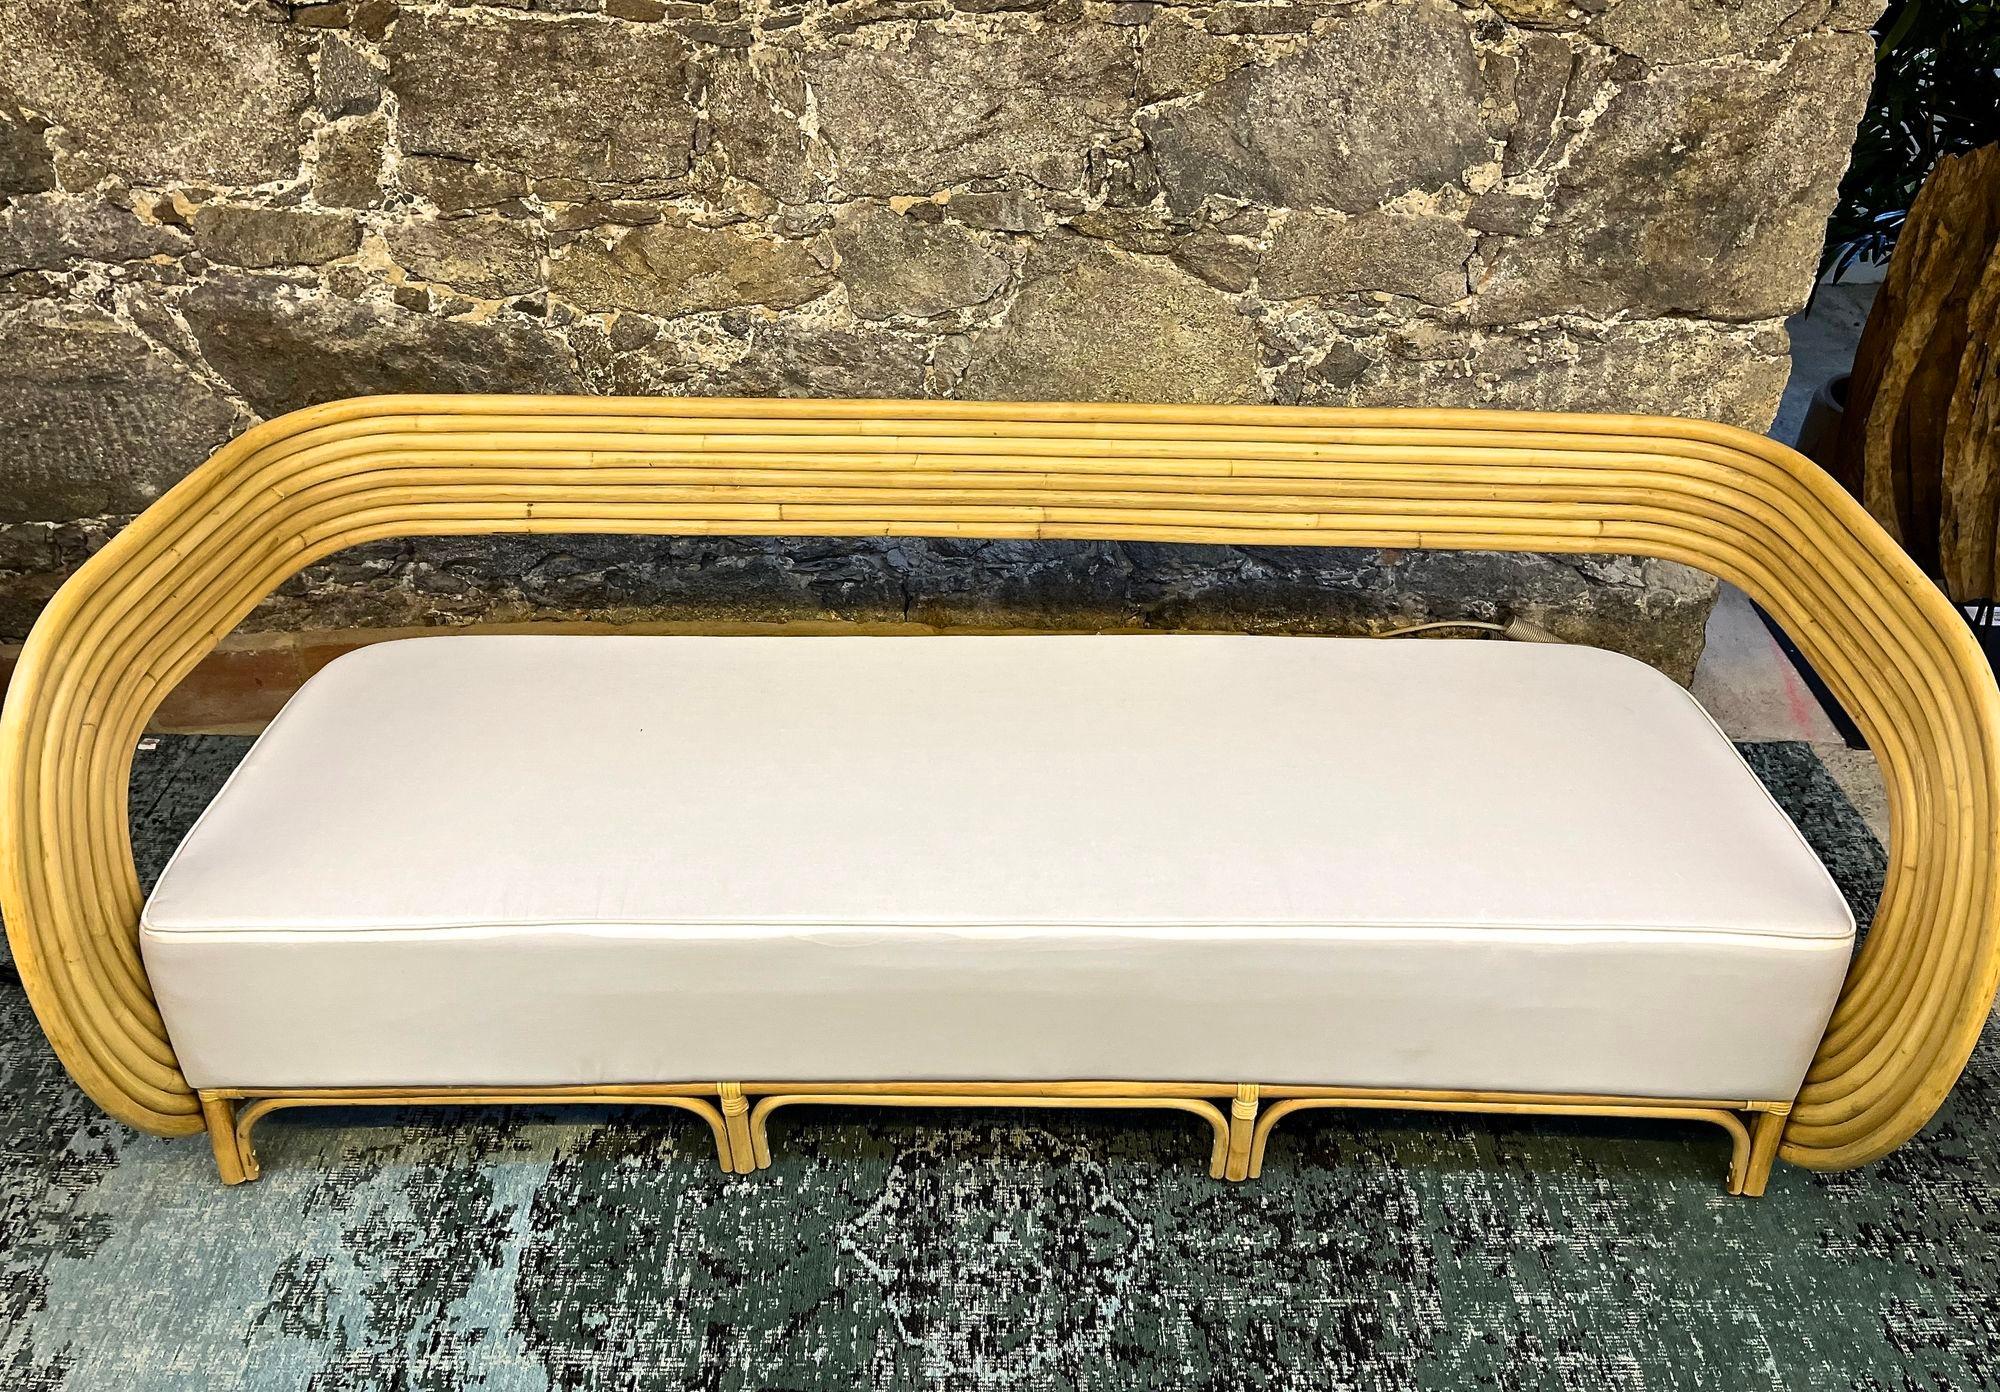 One of a kind, modern bamboo bentwood three seat sofa with comfortable white seating cushion, designed by a very talented javanese designer. This unique large contemporay sofa was made of bright bent bamboo and impresses with its amazing looking